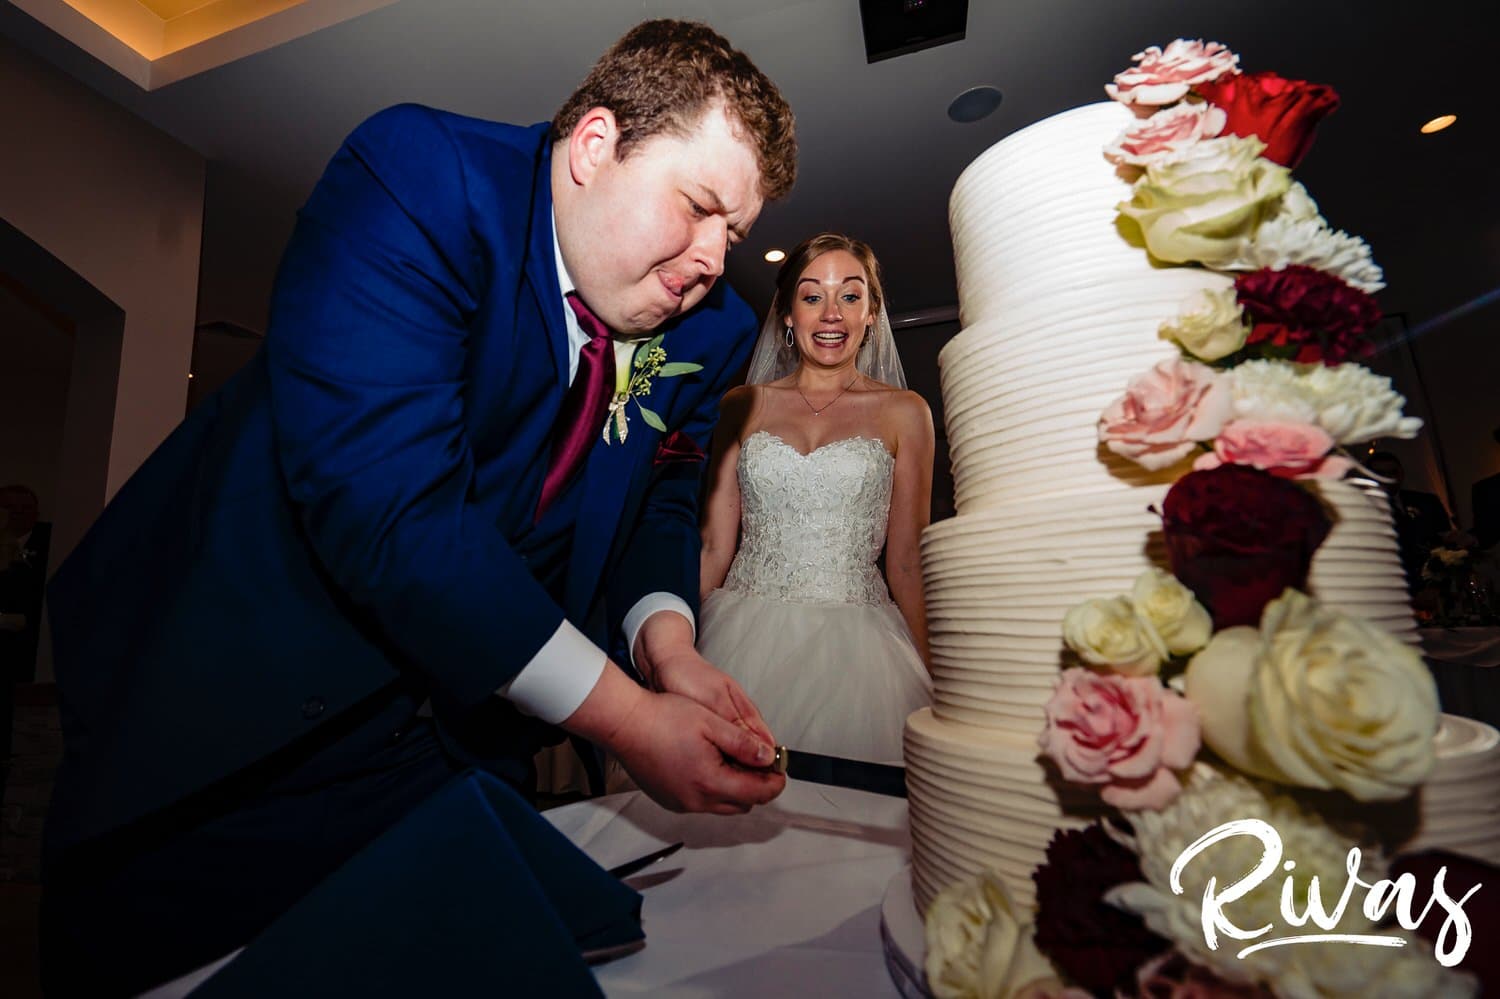 A candid picture of a groom cutting through two layers of wedding cake with a very serious look on his face as his bride surprisingly looks on in the background during a wedding reception at Piazza Messina. 